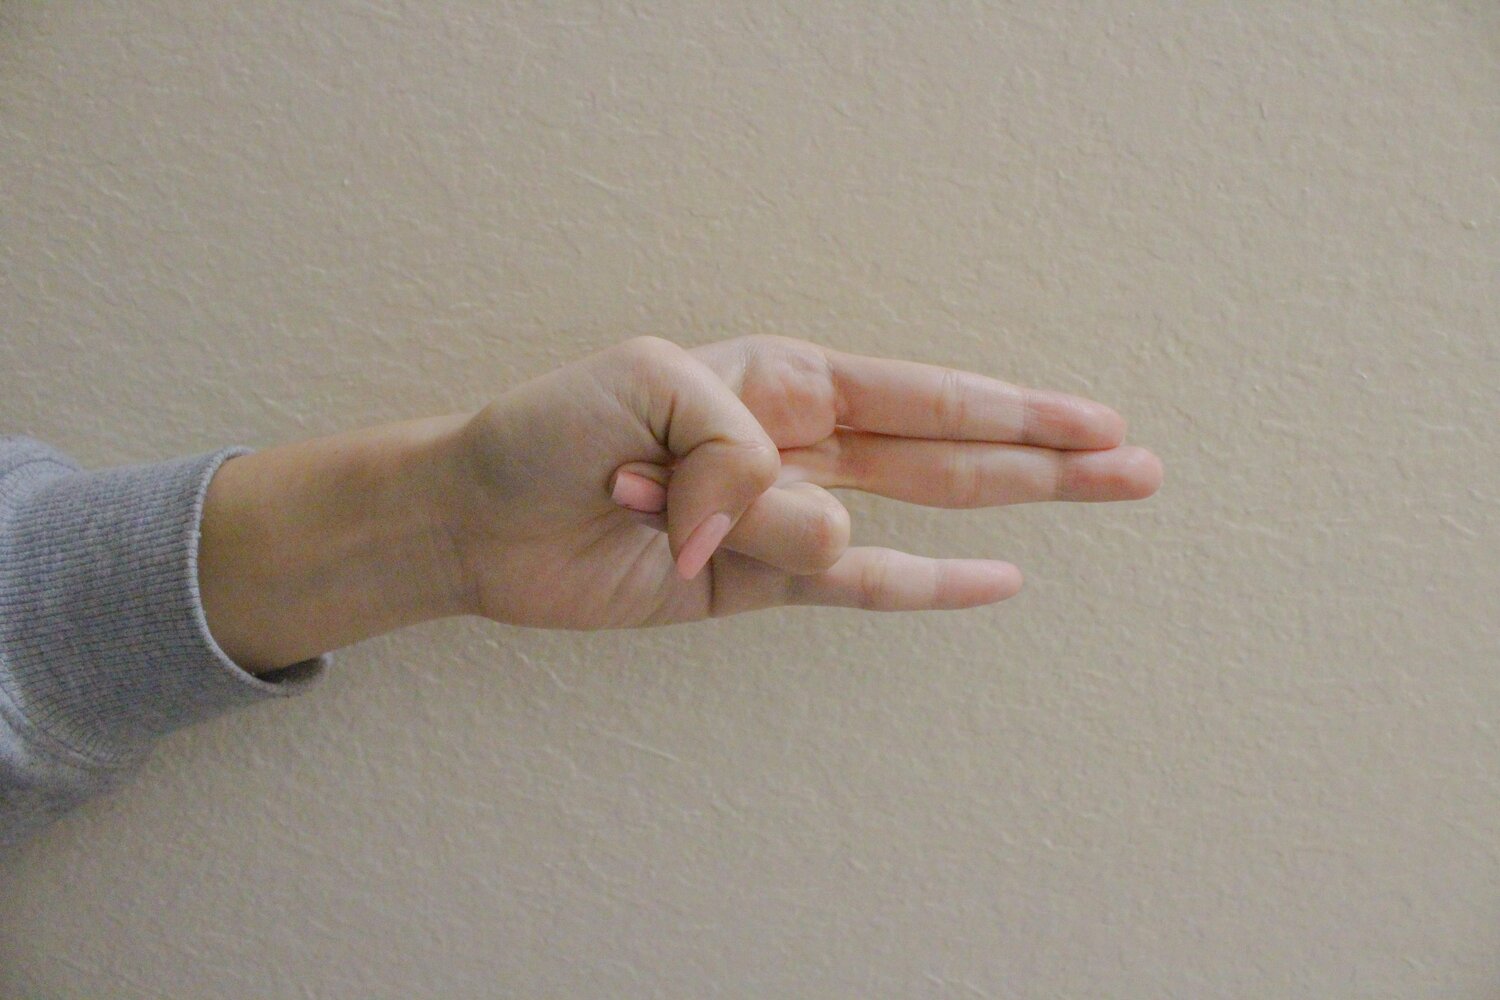 Thumb holding the ring finger while the rest of the fingers point outwards